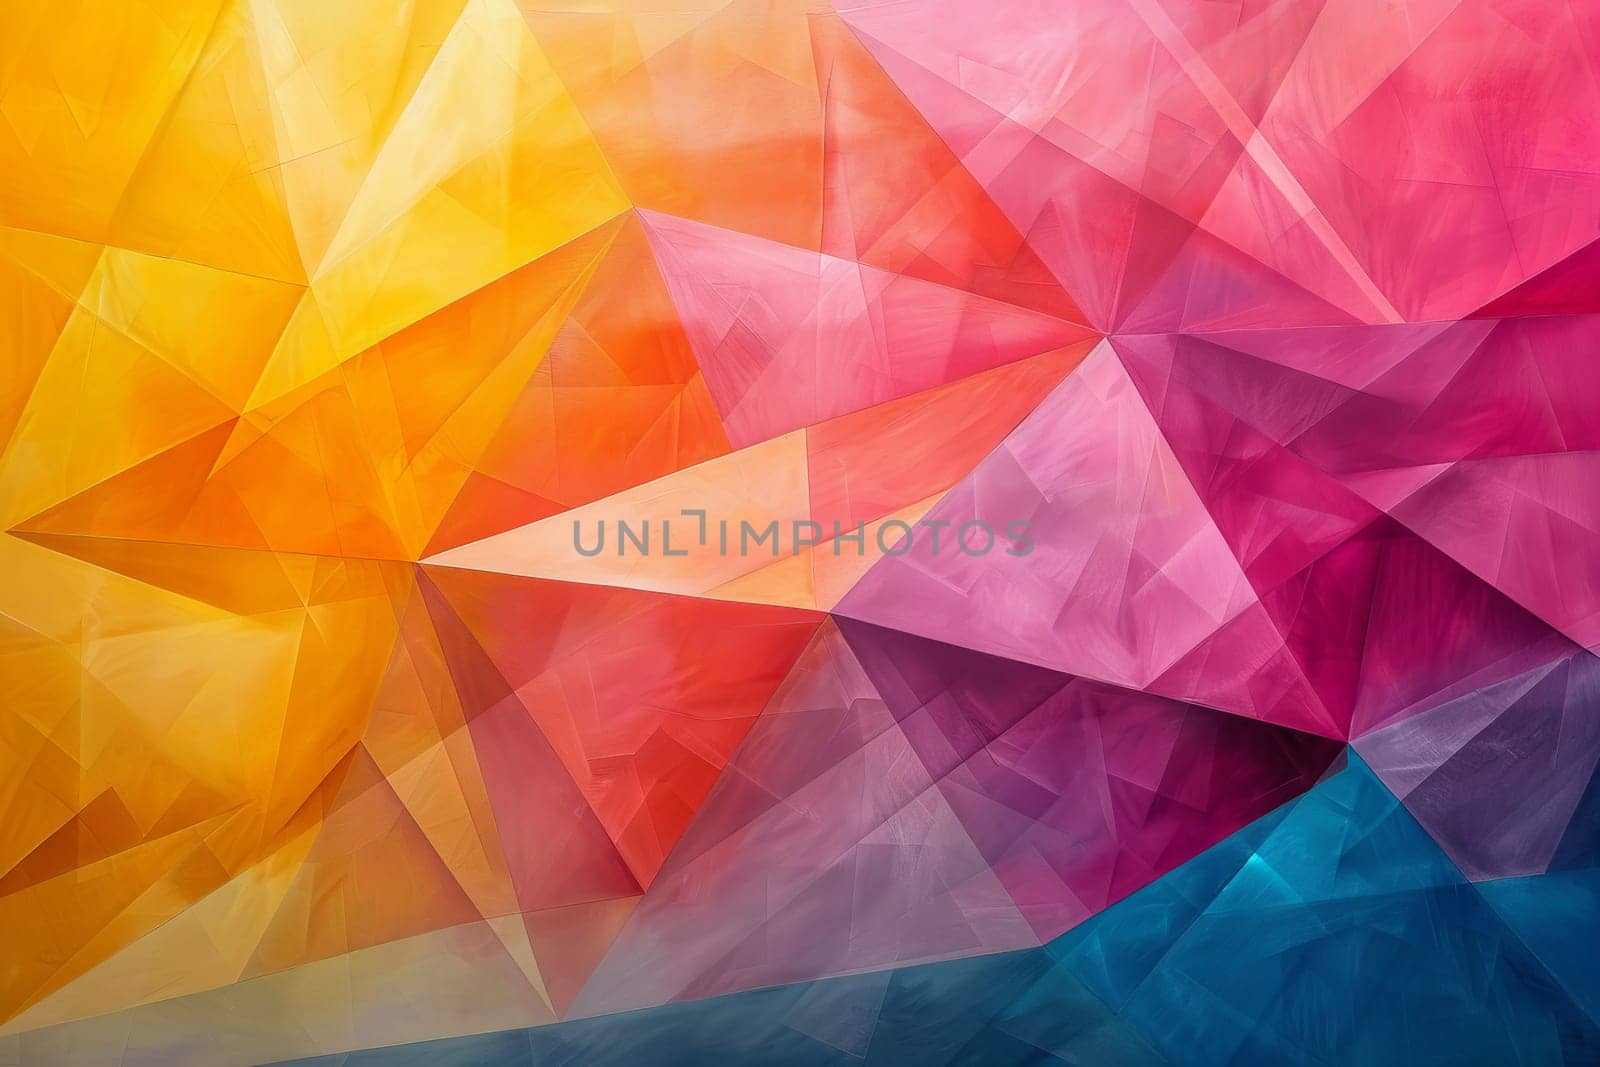 A colorful abstract painting with a lot of triangles and squares. The colors are bright and vibrant, creating a sense of energy and excitement